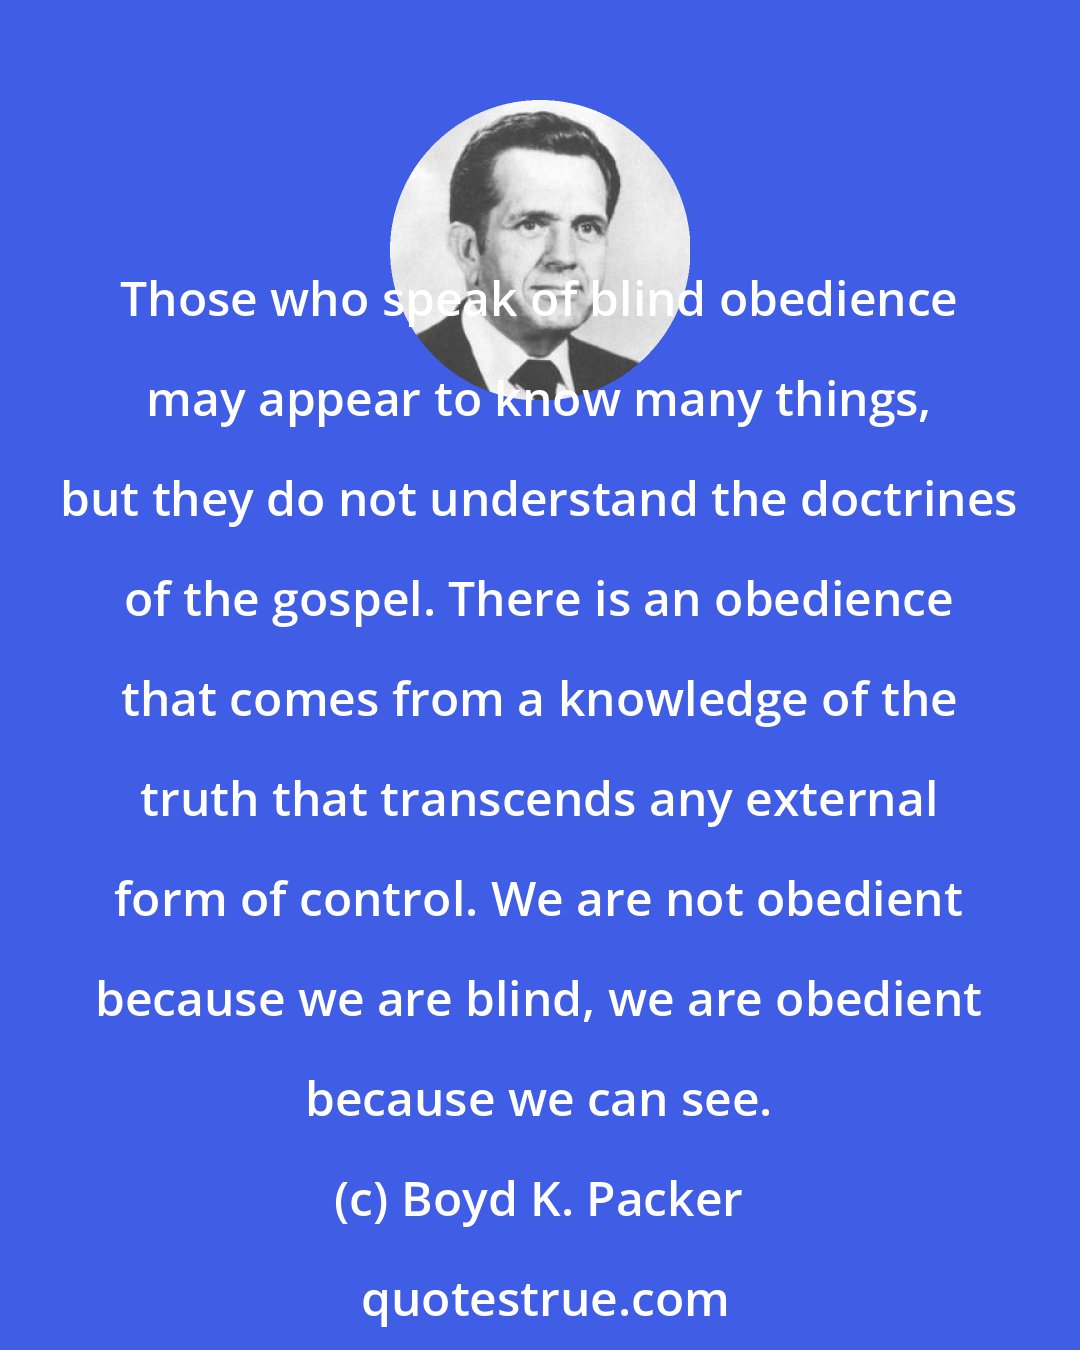 Boyd K. Packer: Those who speak of blind obedience may appear to know many things, but they do not understand the doctrines of the gospel. There is an obedience that comes from a knowledge of the truth that transcends any external form of control. We are not obedient because we are blind, we are obedient because we can see.